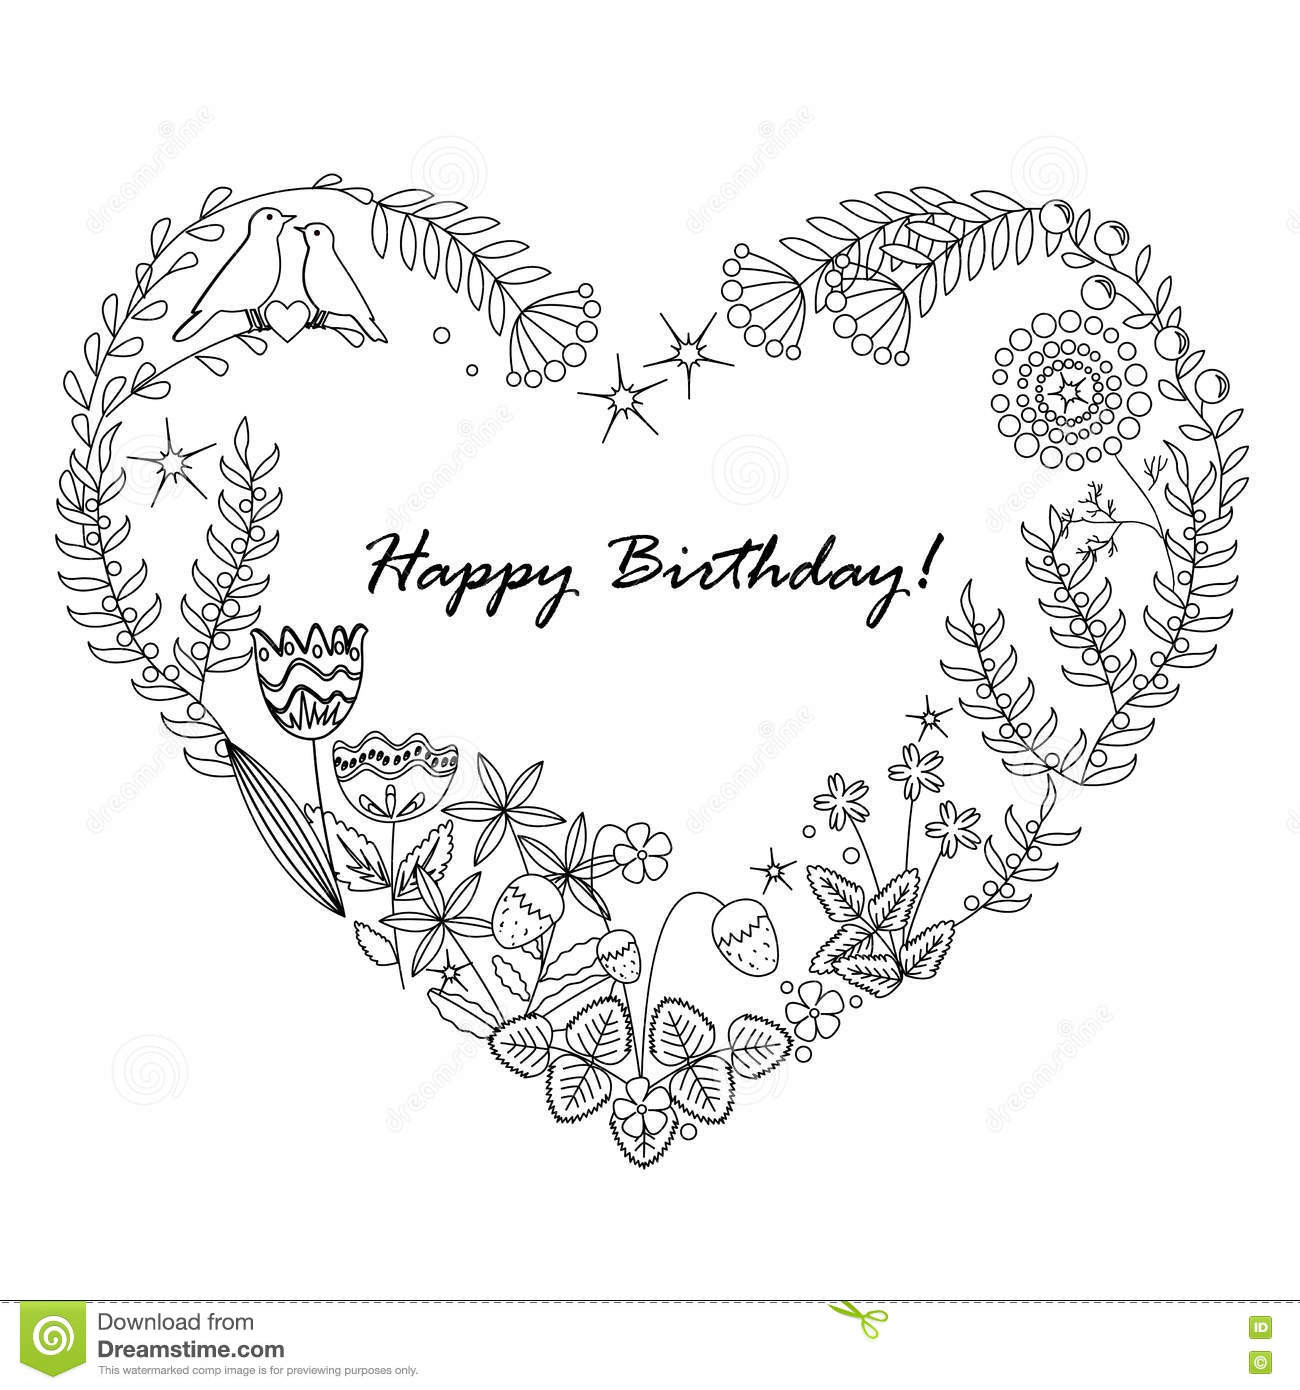 Happy Birthday Coloring Pages For Friends Happy Birthday Coloring Pages New Free Printable Happy Birthday